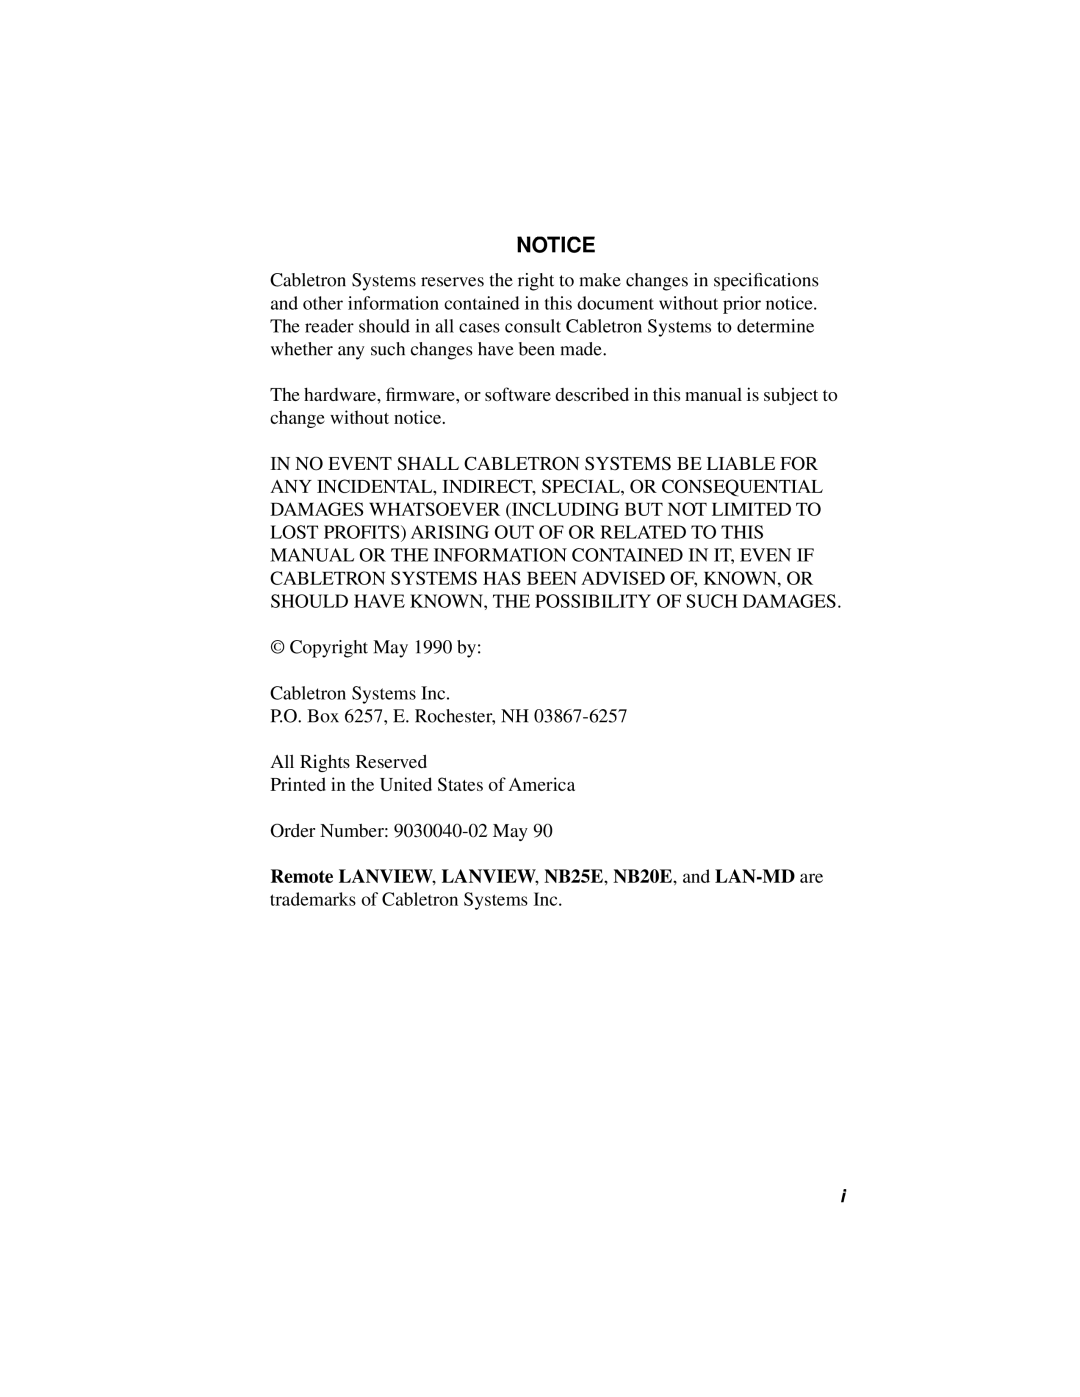 Cabletron Systems NB25 E, NB20E user manual Copyright May 1990 by Cabletron Systems Inc 